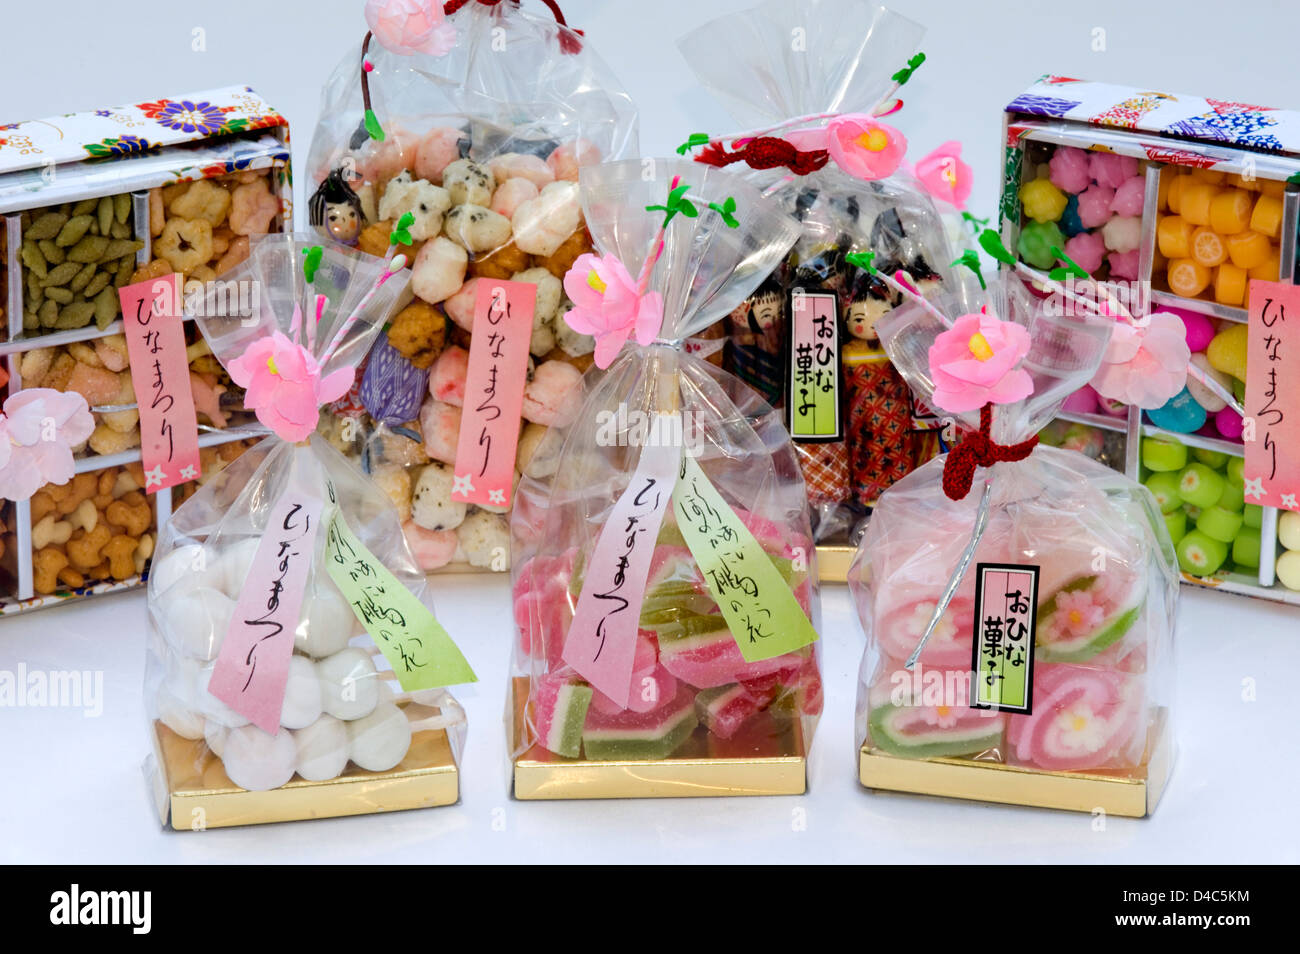 Colorful Hina Matsuri (Japanese Hina doll festival) candy, sweets and other snacks that are enjoyed on Hina Festival in March. Stock Photo